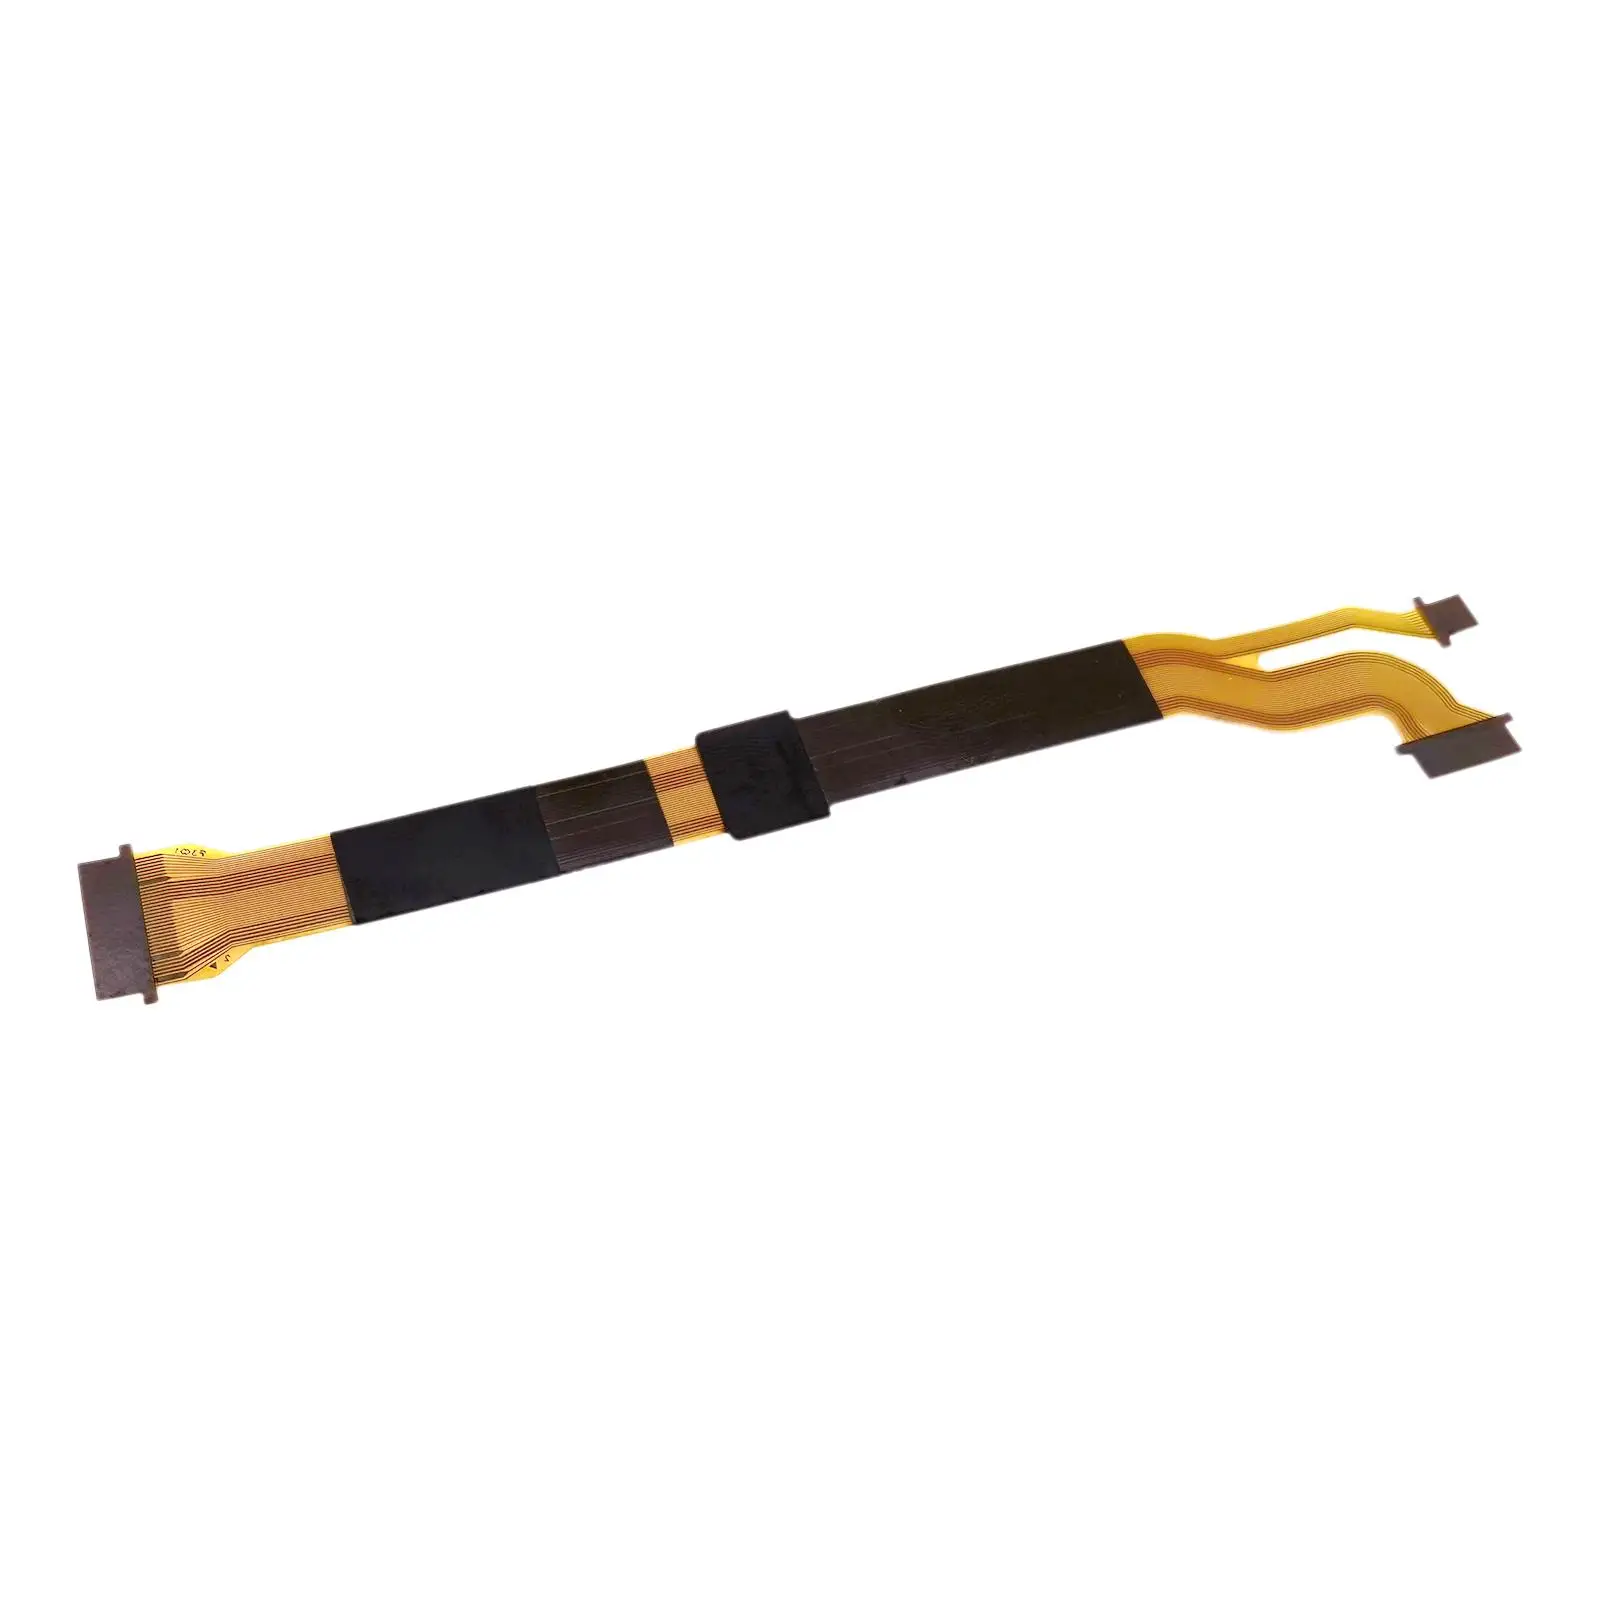 Lens Anti SHAKE Flex Cable Supplies Professional Durable Replace Parts Stable Performance Accessory Brass Camera for E 55-210mm